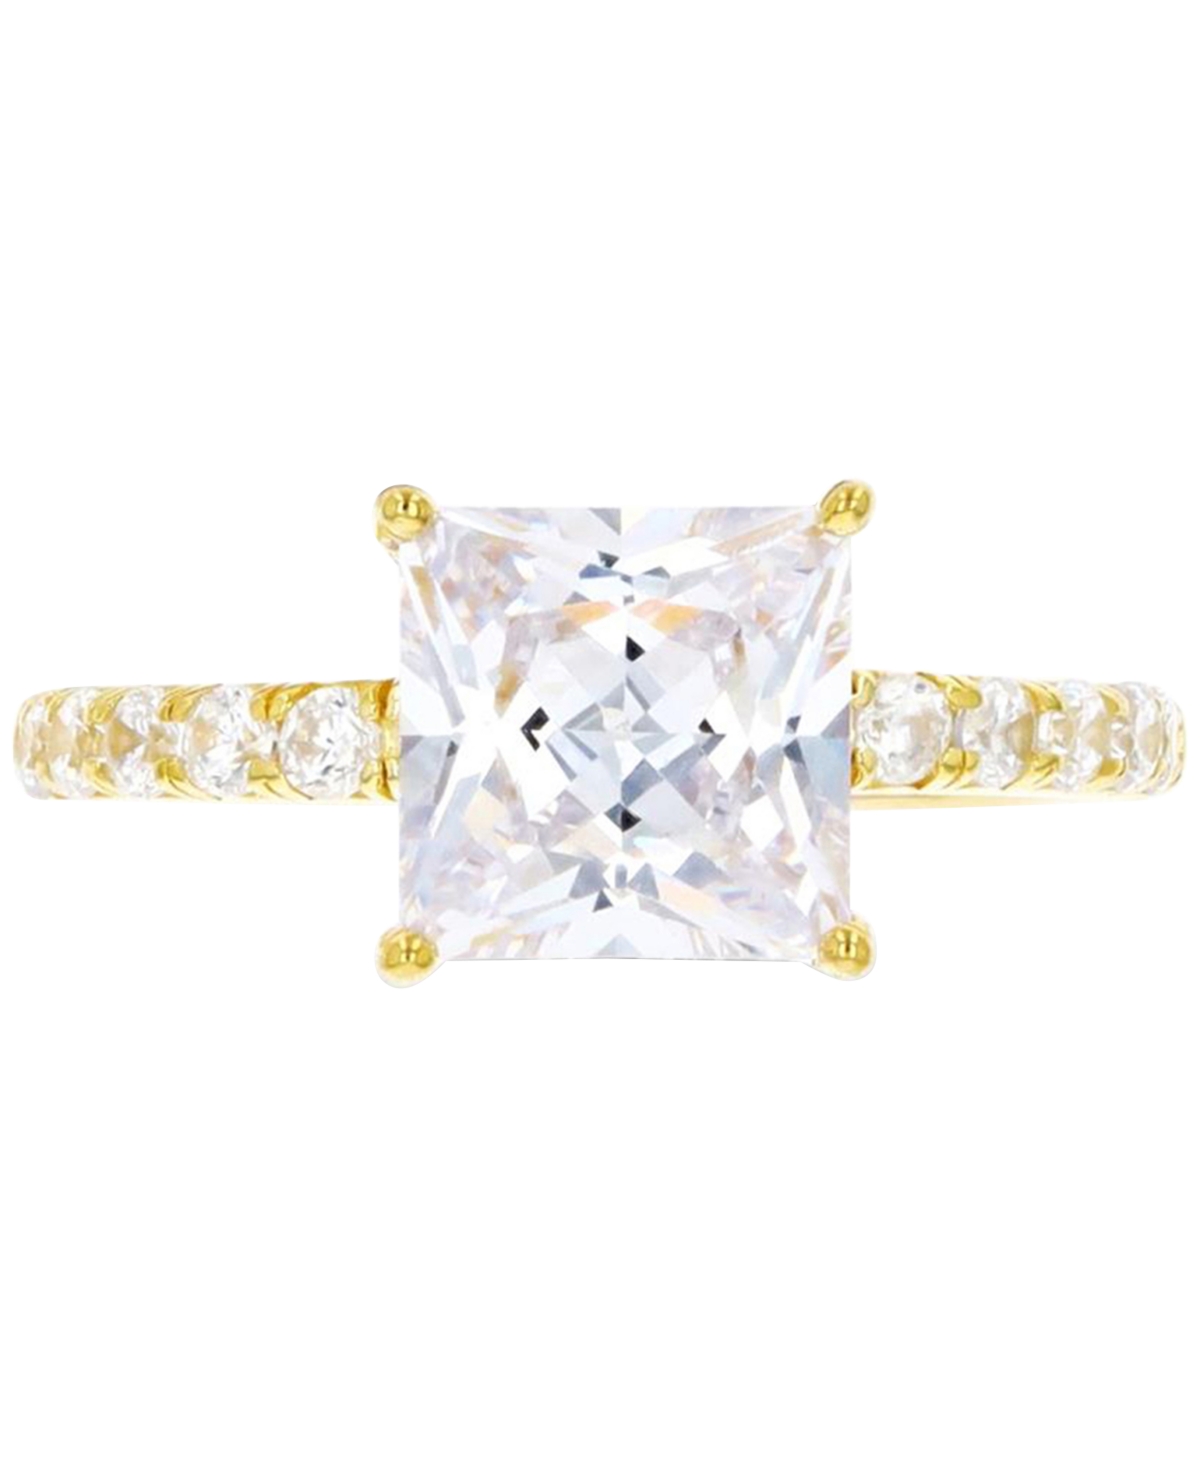 Cubic Zirconia Cushion-Cut Engagement Ring in 14k Gold-Plated Sterling Silver - Gold